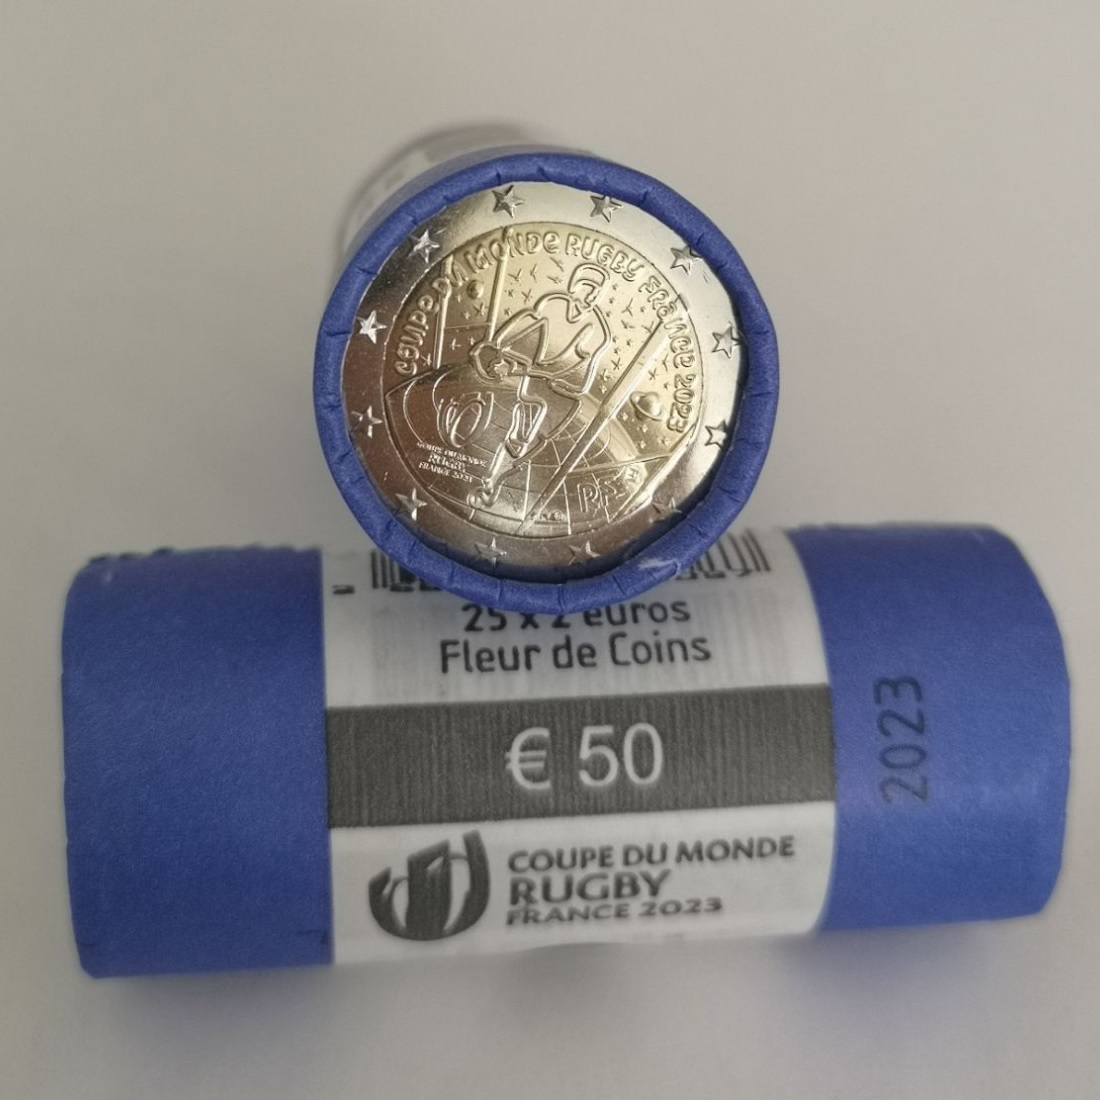 2 euro roll France 2023 - Rugby World Cup, France 2023 (zoom)